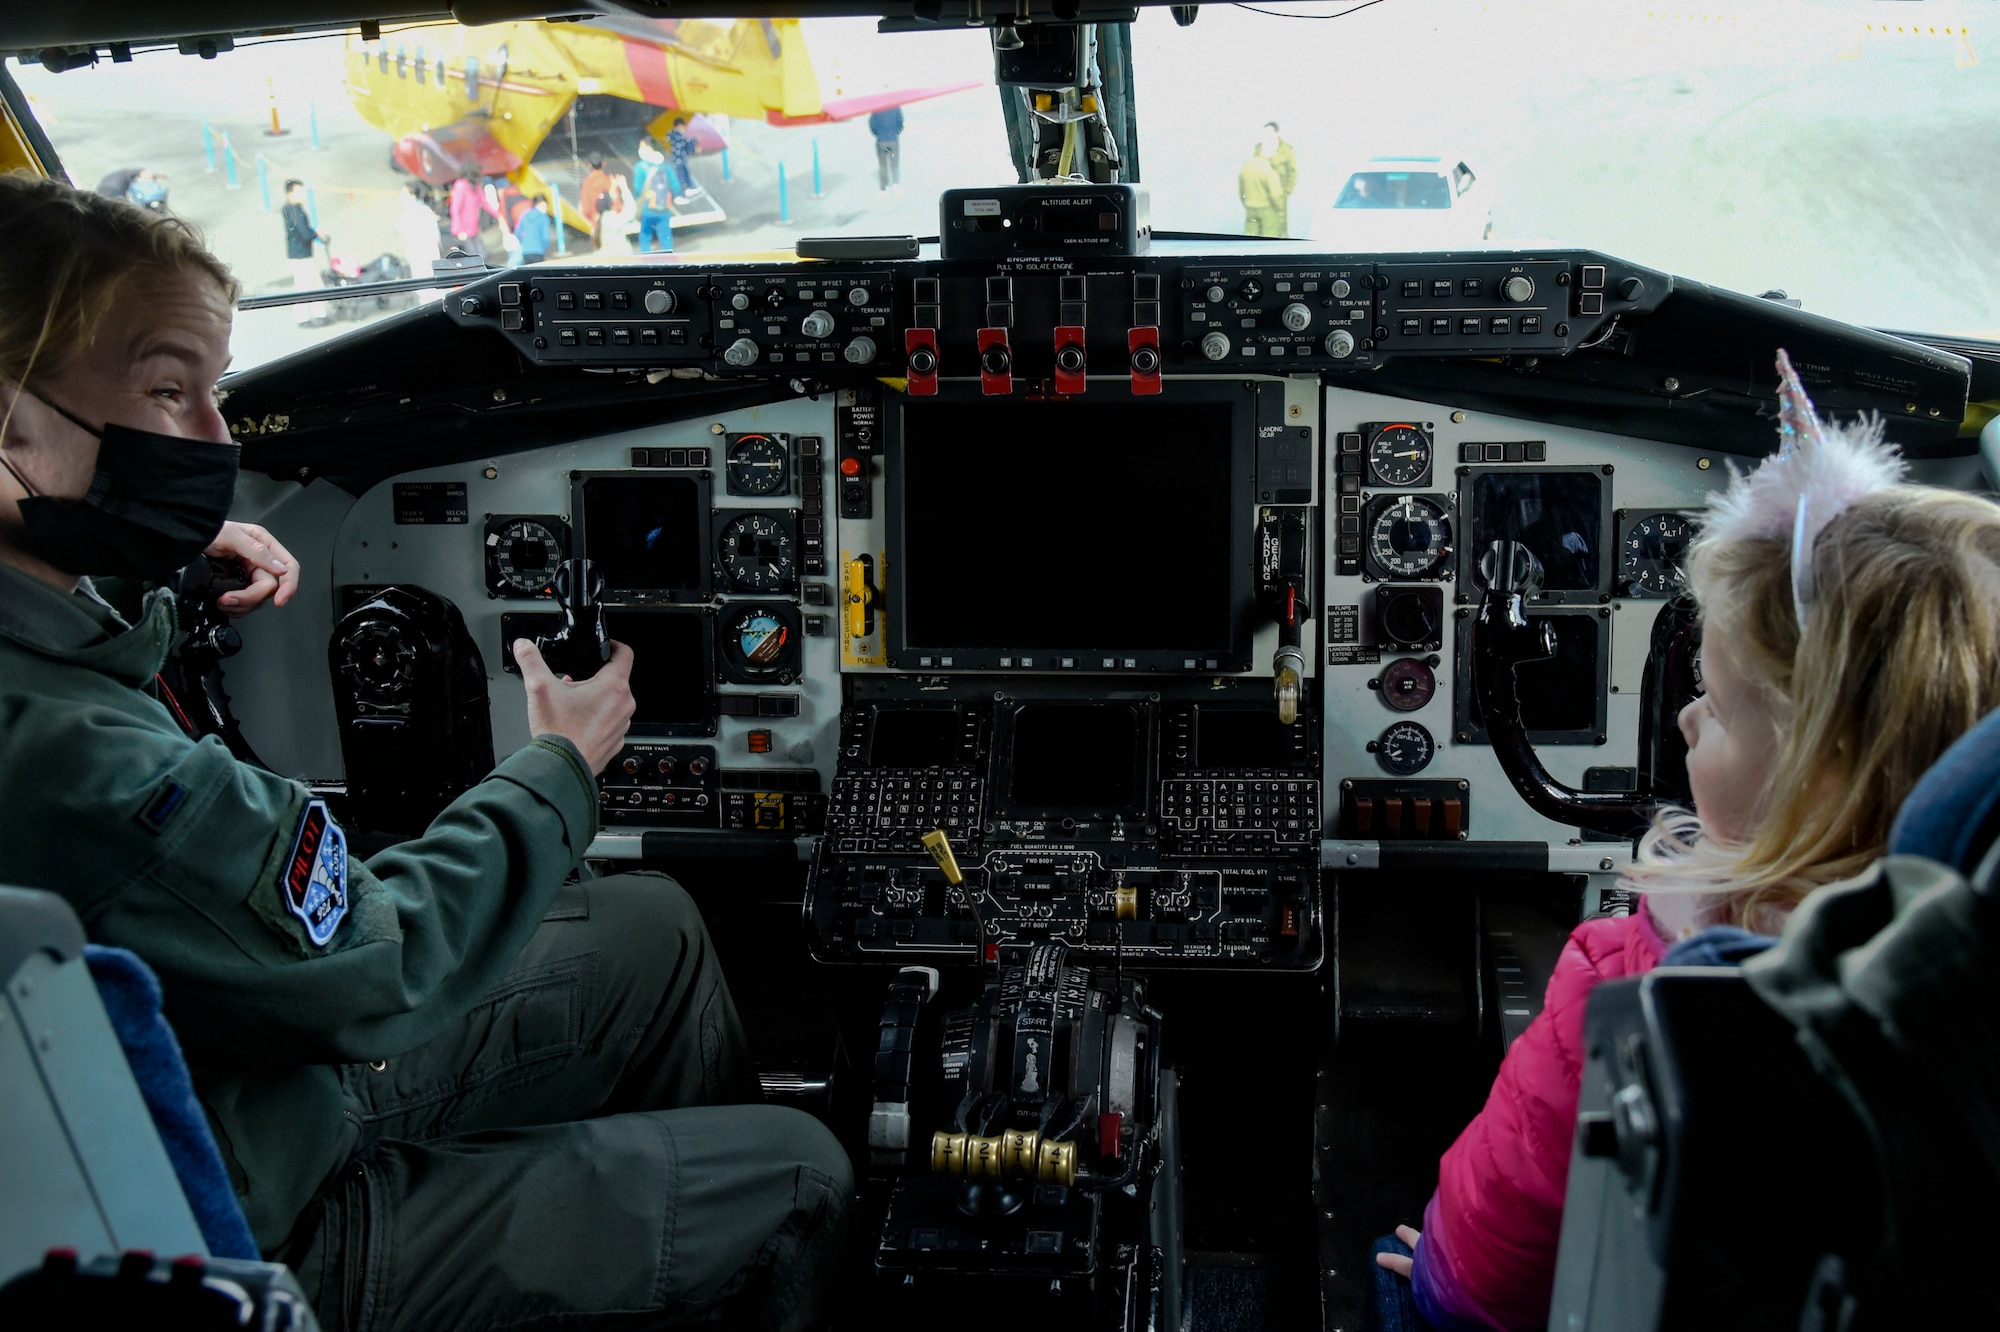 United States Air Force 1st Lt. Elizabeth Denton, 92nd Air Refueling Squadron KC-135 Stratotanker pilot, shows a young girl the inside of a KC-135 flight deck during “The Sky’s No Limit: Girls Fly Too” event in Abbotsford, Canada, Oct. 3, 2021. The event gave Airmen from Fairchild an opportunity to empower young ladies, and inspire them to pursue various career opportunities. (U.S. Air Force photo by 2nd Lt. Michelle Chang). (U.S. Air Force photo by 2nd Lt. Michelle Chang)